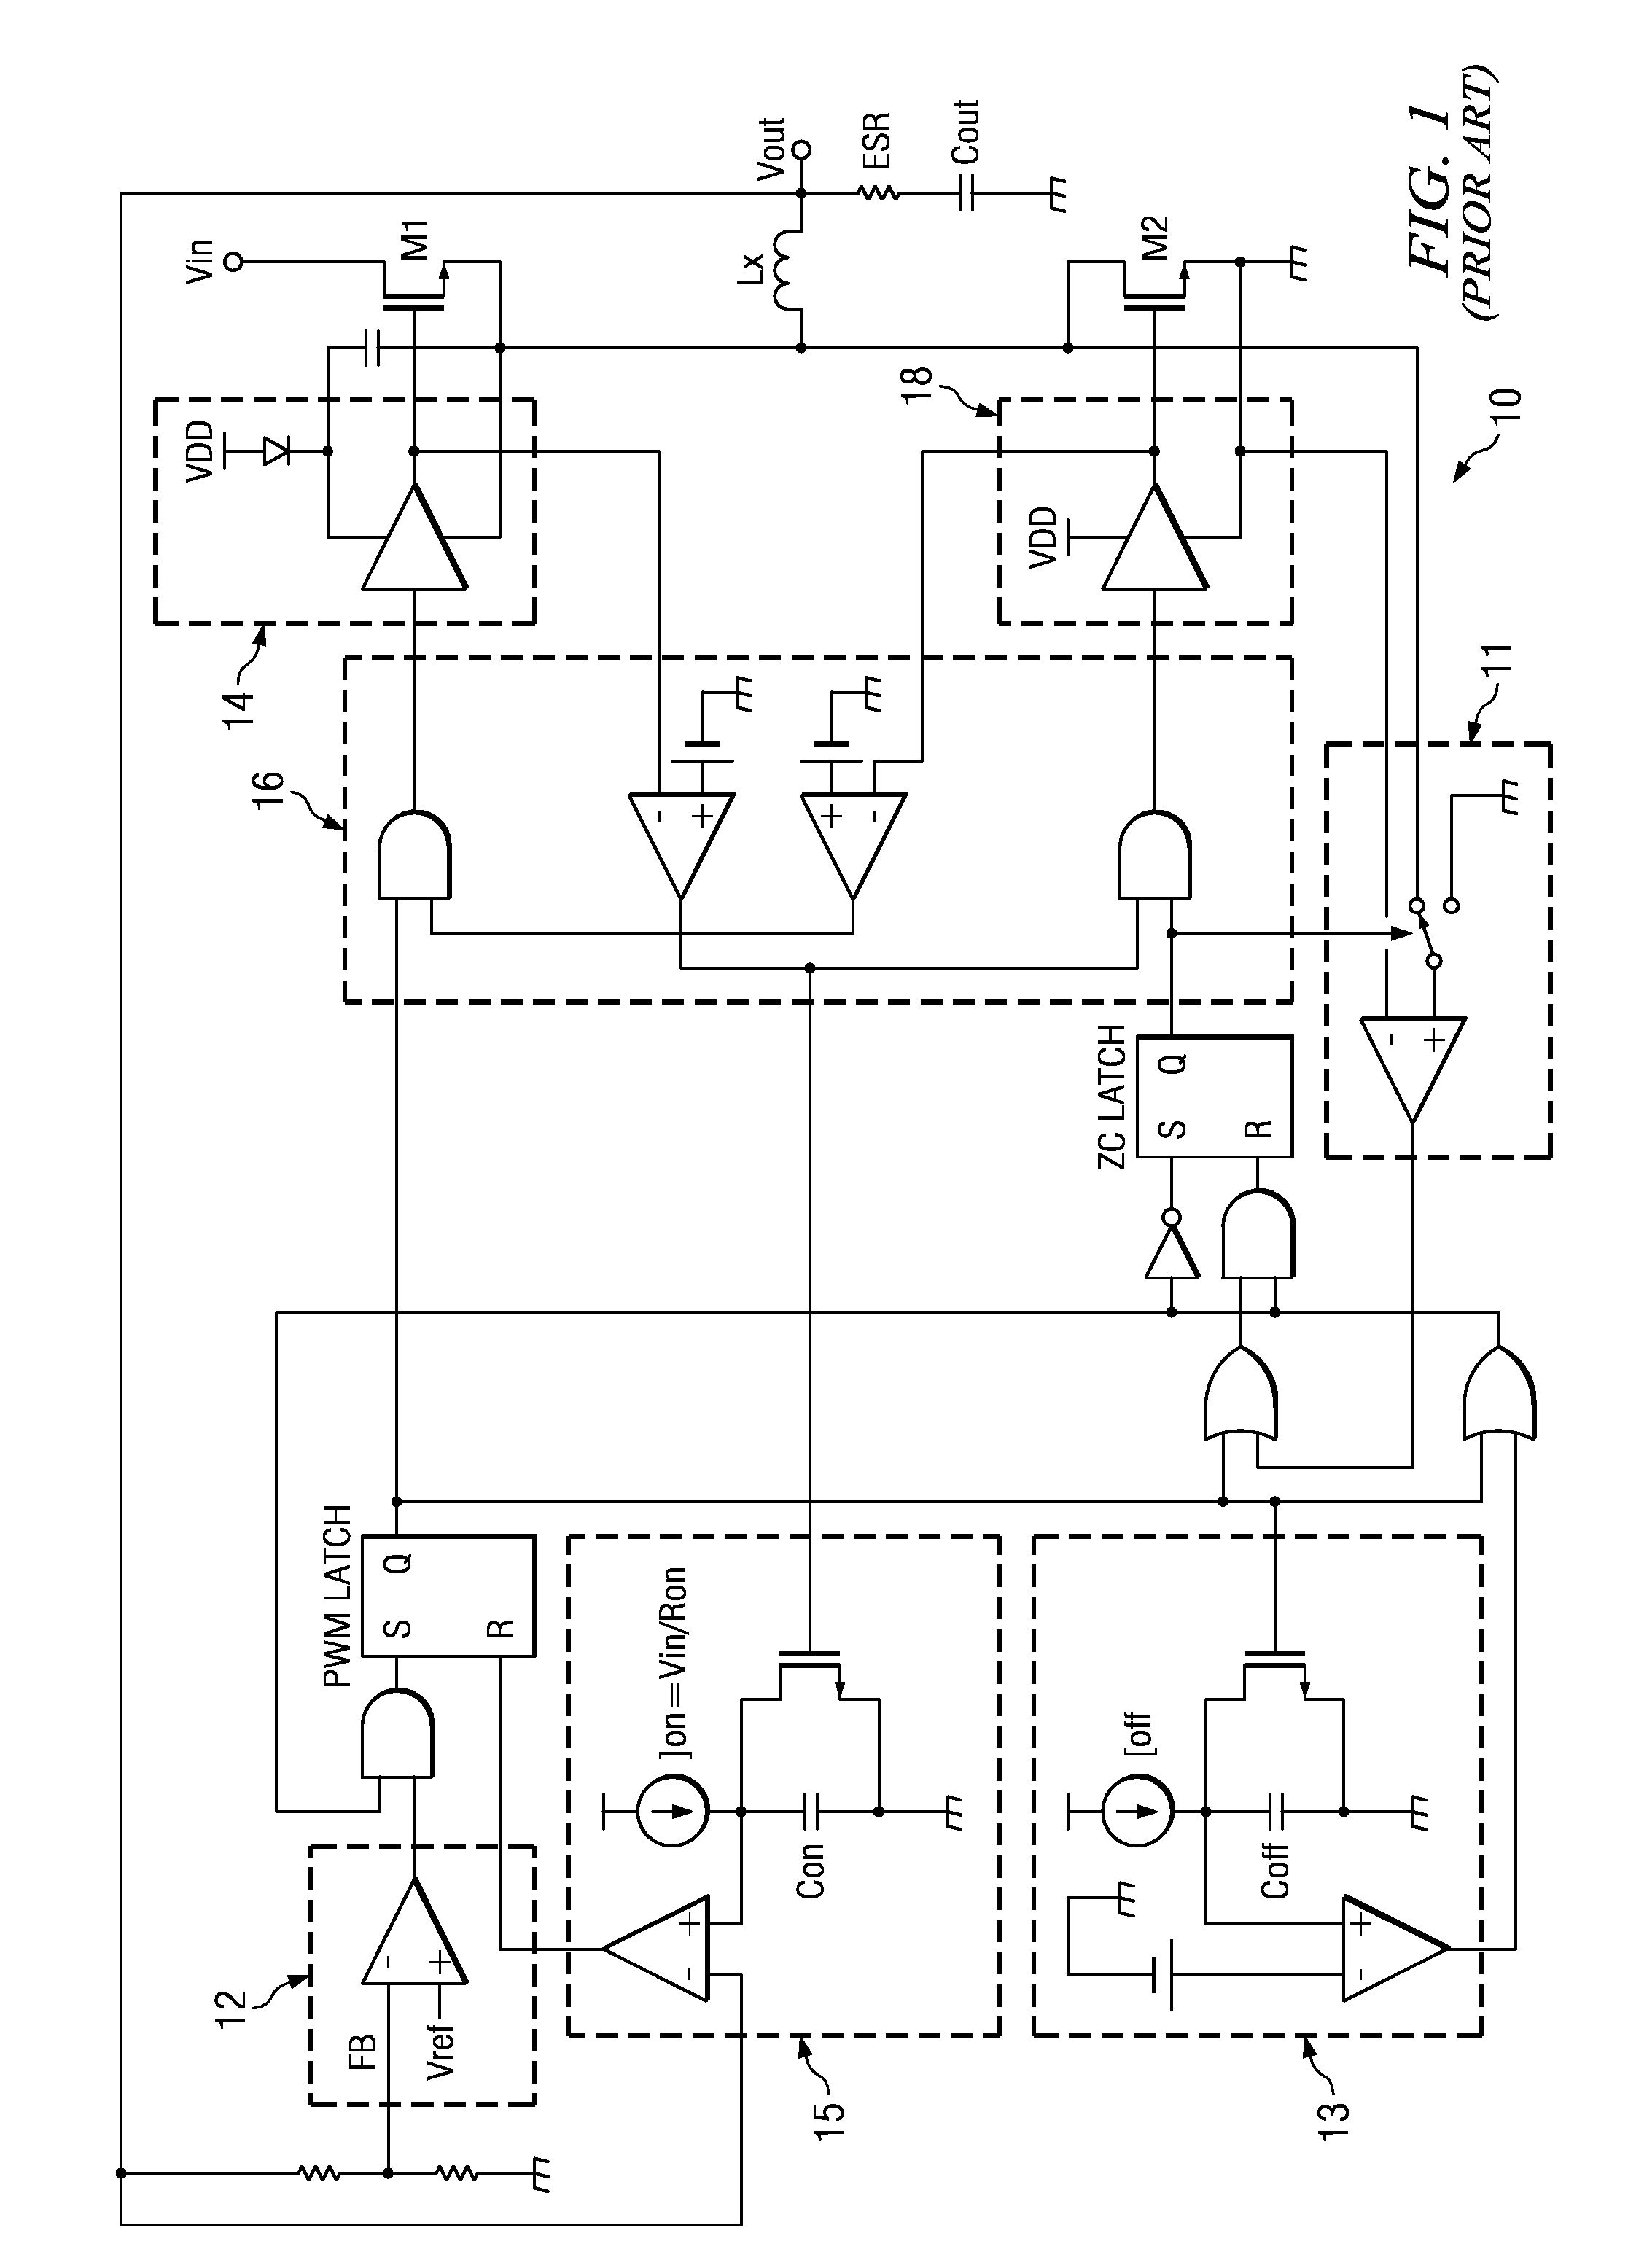 High efficiency power converter operating free of an audible frequency range